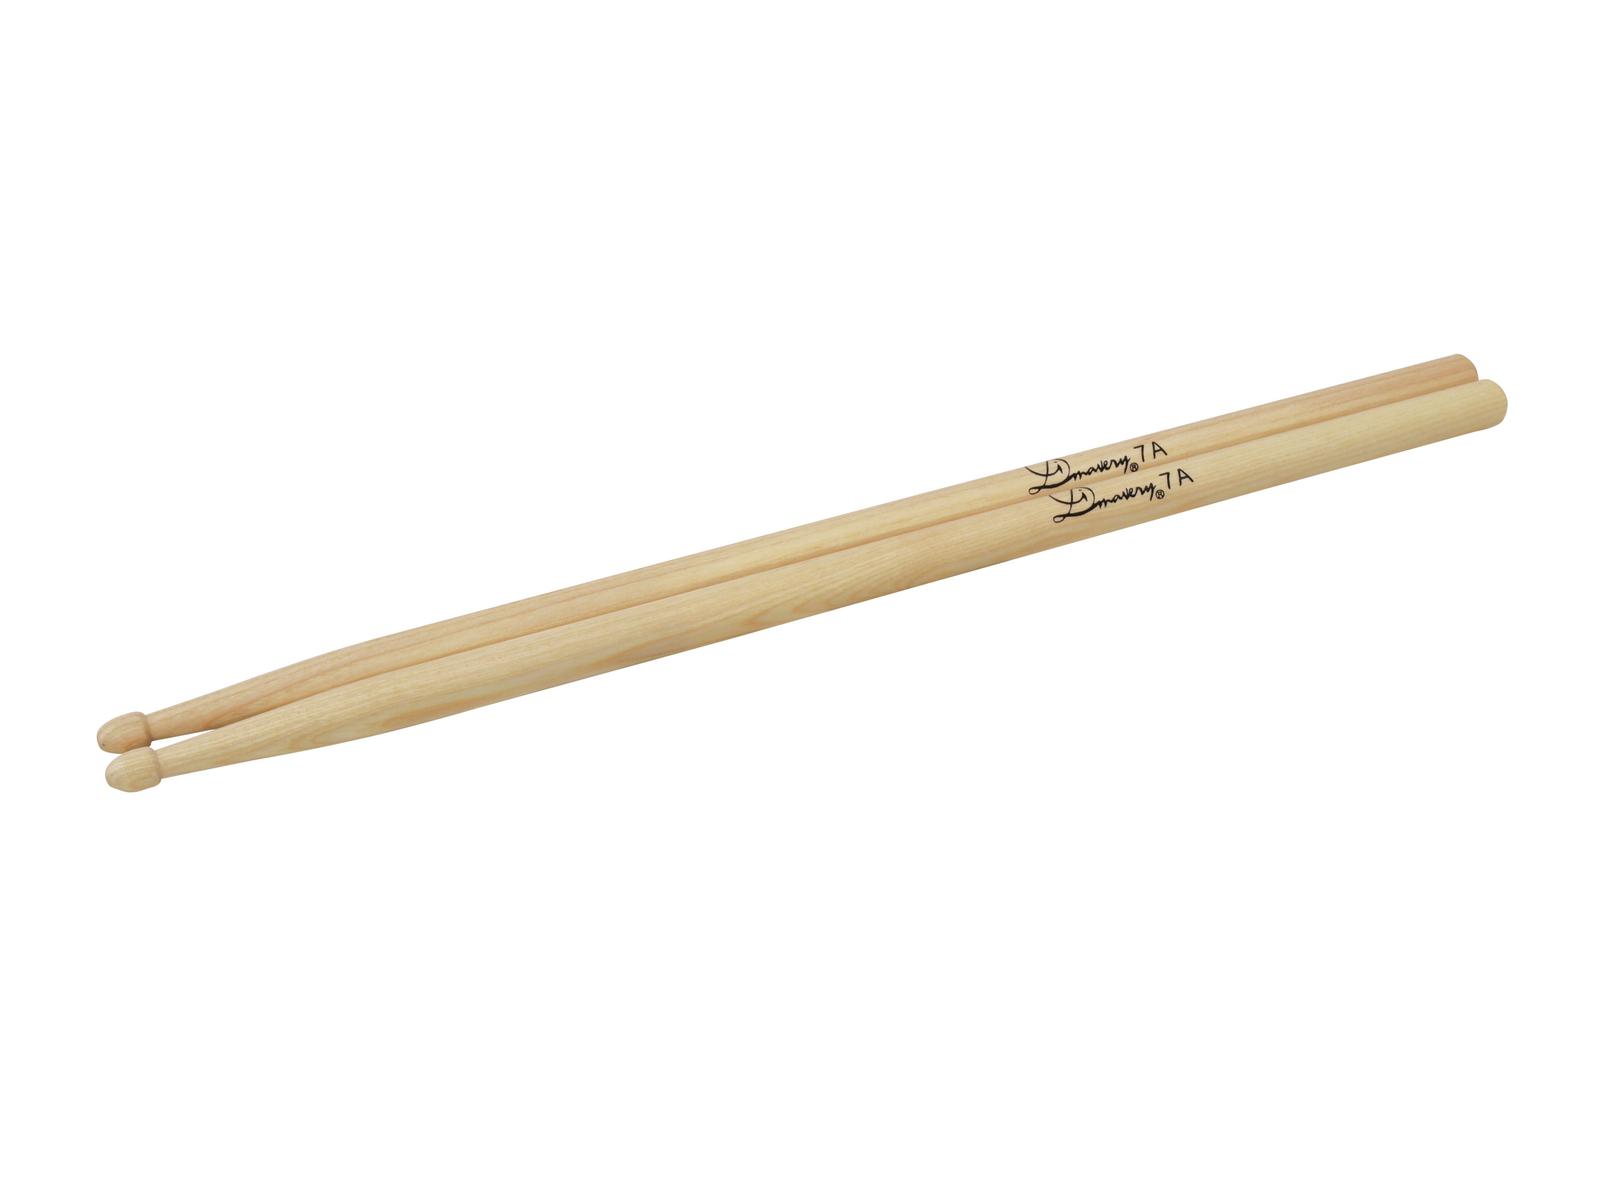 DIMAVERY DDS-7A Drumsticks, Hickory